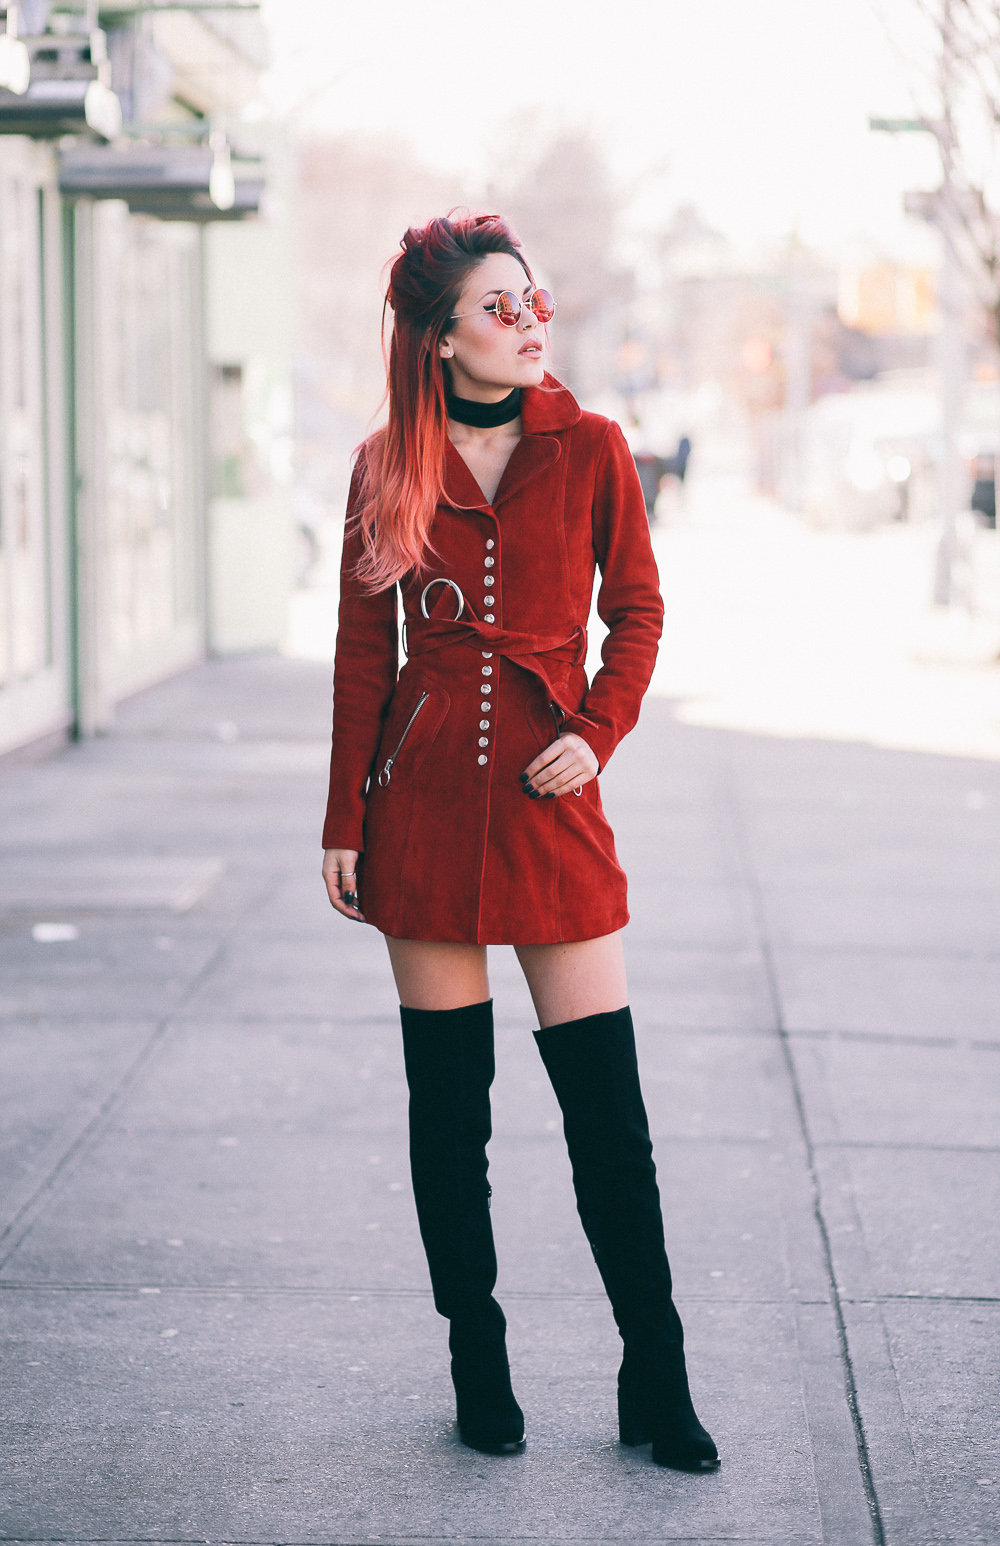 Le Happy wearing thigh high boots and suede coat